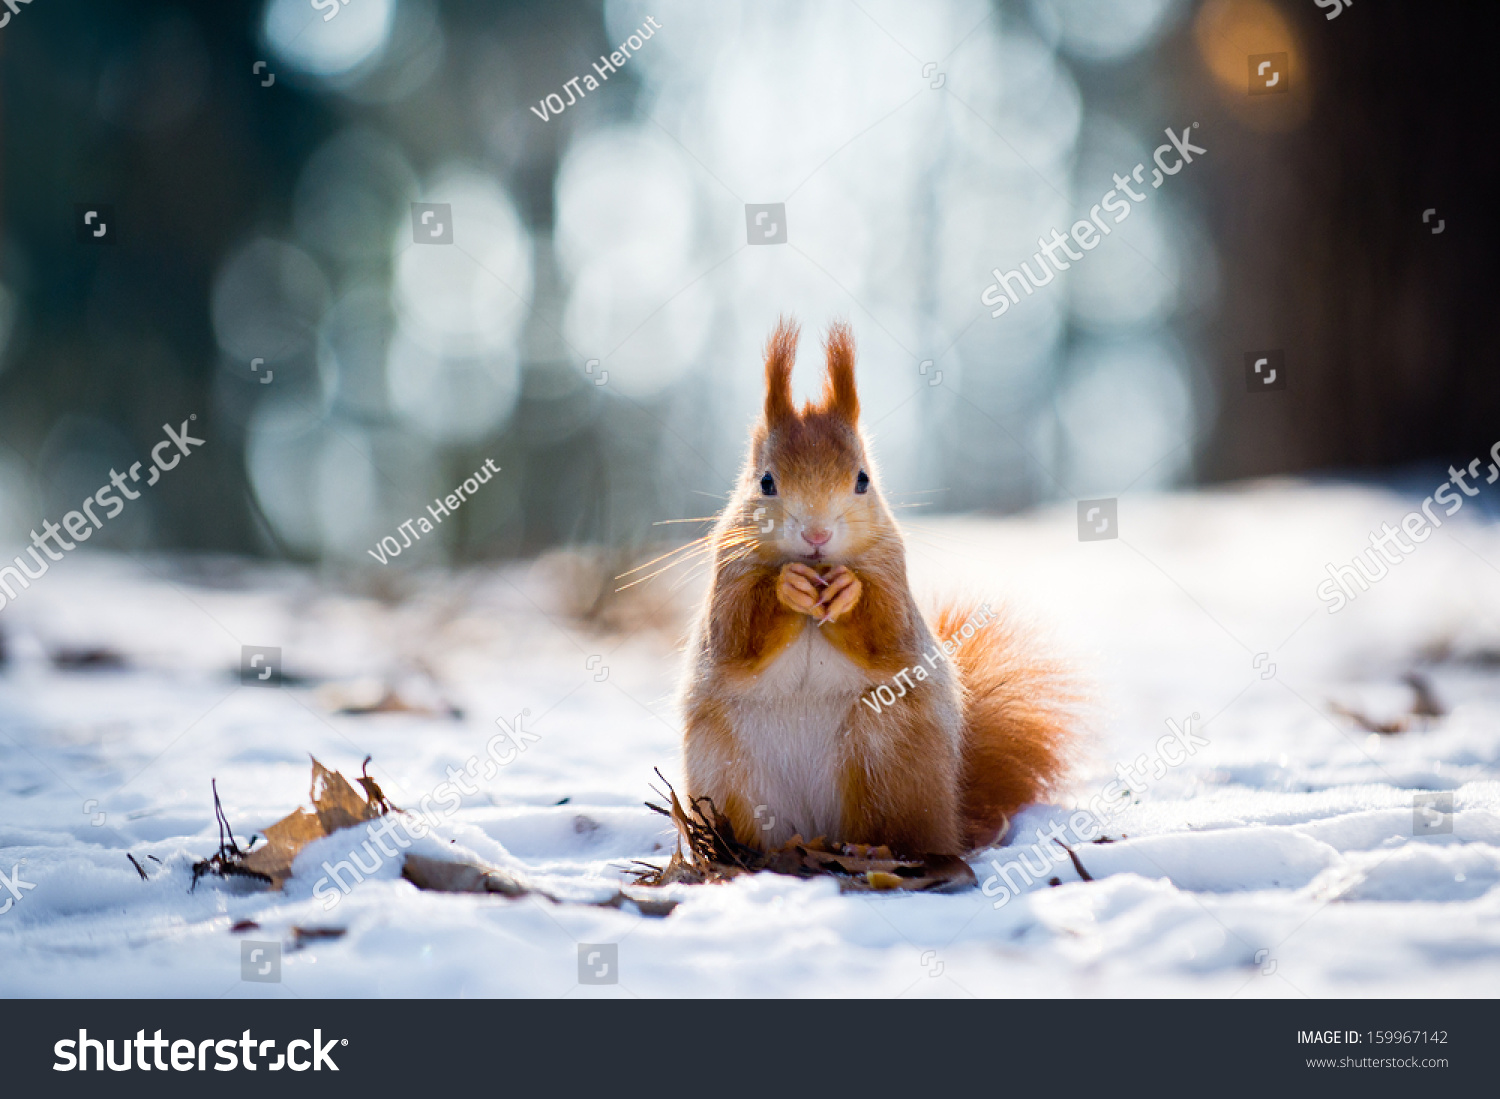 Cute red squirrel eats a nut in winter scene with nice blurred forest in the background #159967142